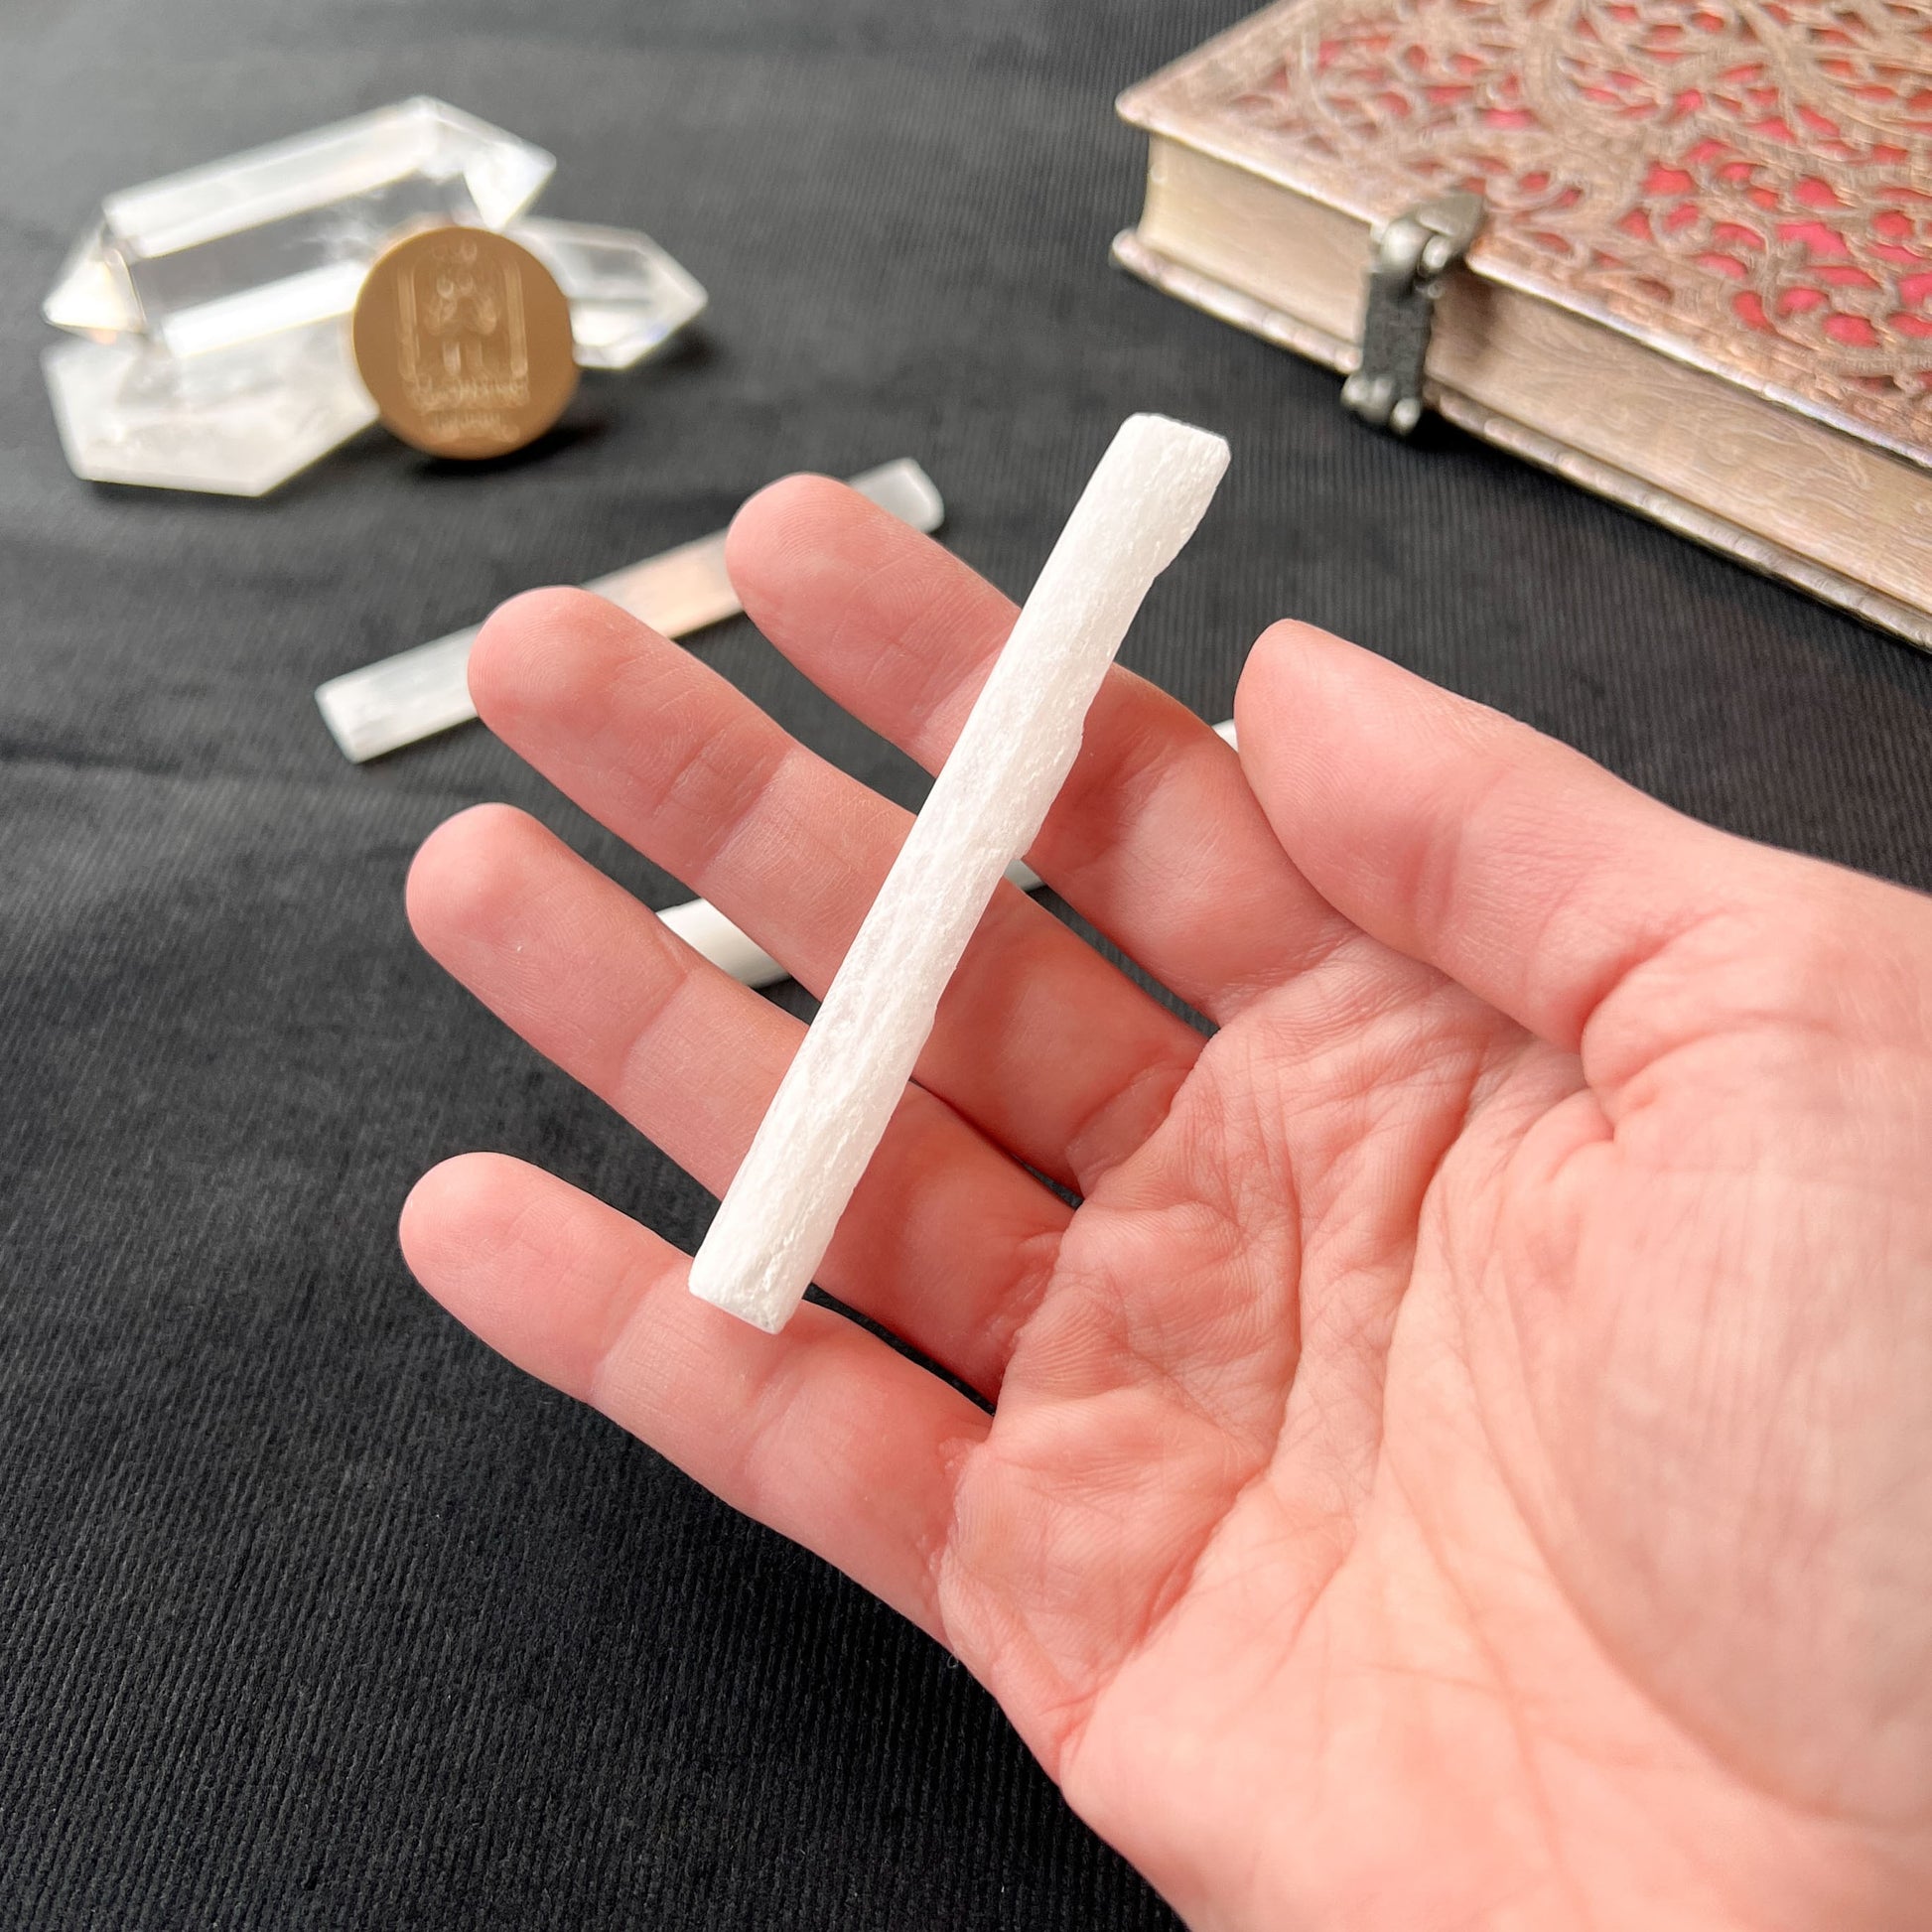 Selenite stick 7 to 9 cm 2.75 to 3.54 in Baguette Magick